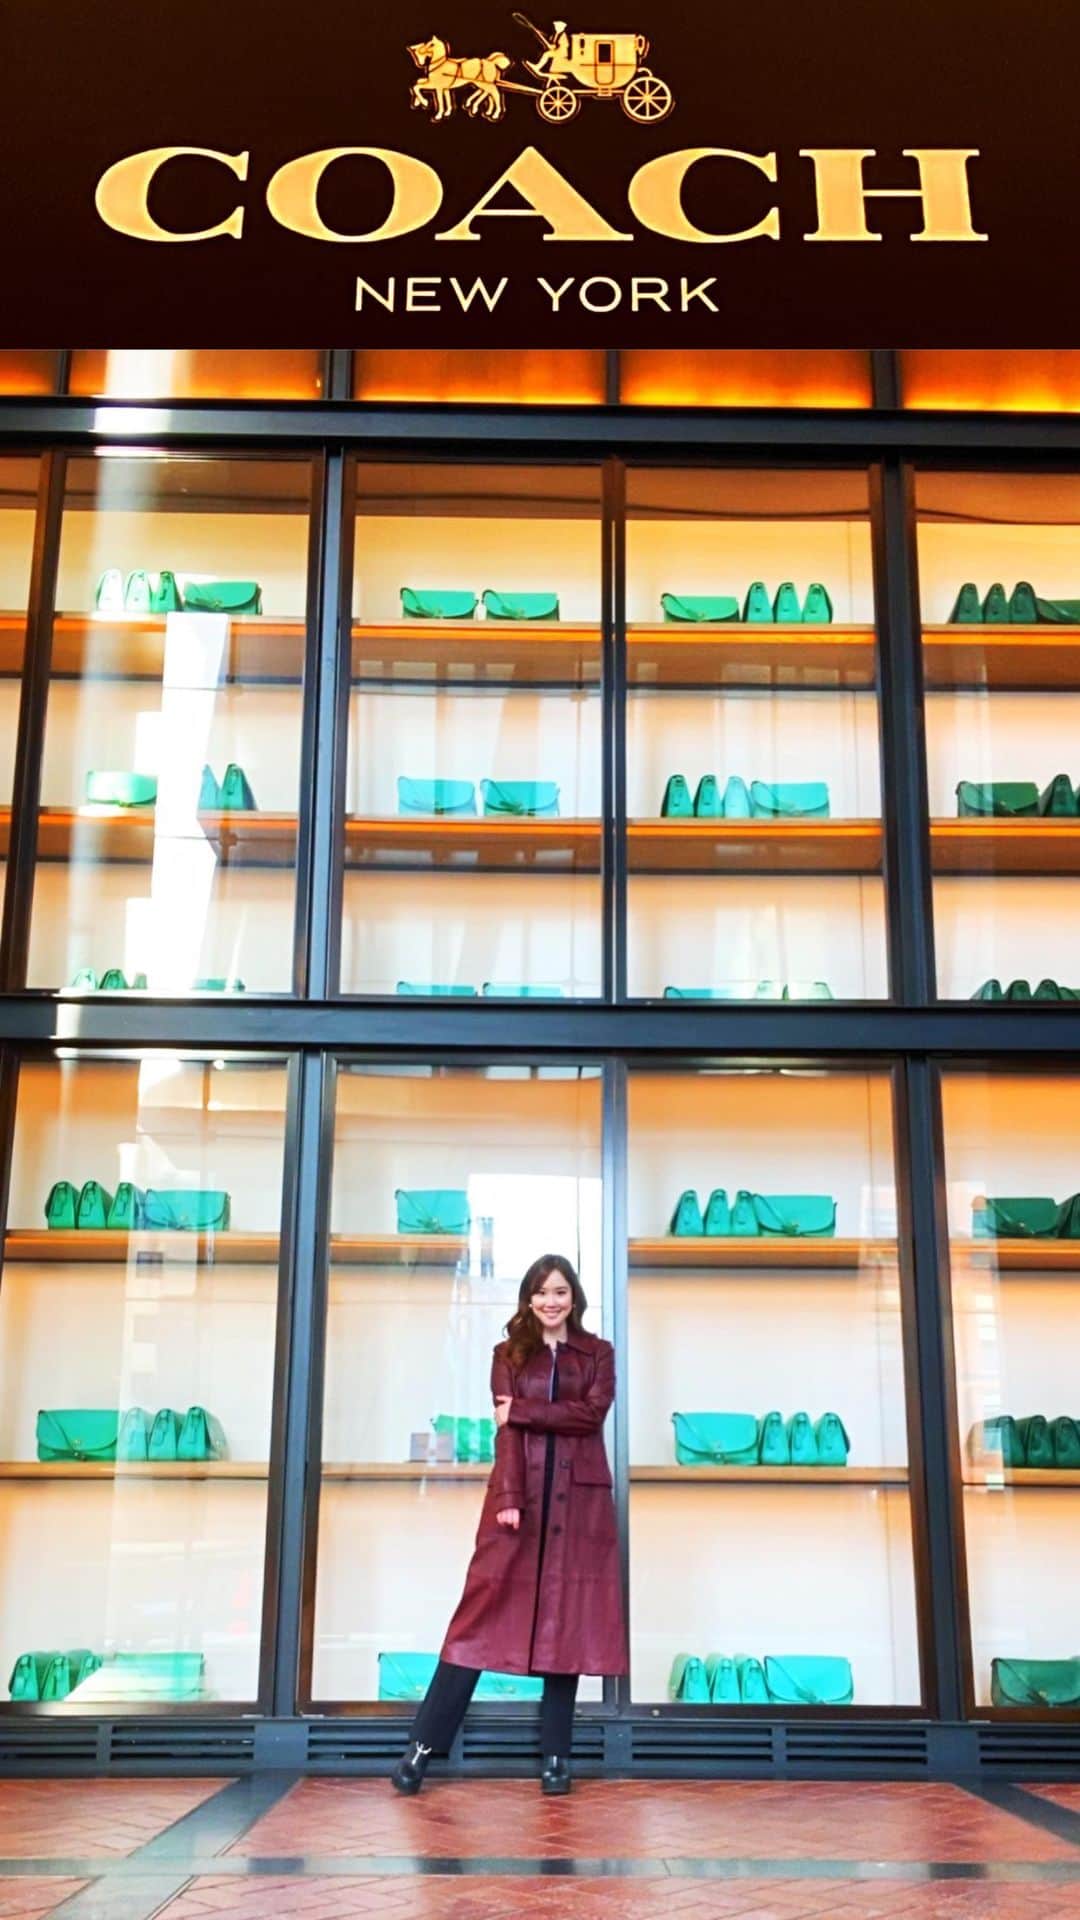 メロディー・モリタのインスタグラム：「Inside the @COACH Global Headquarters in New York!🗽👜 I was invited for an insightful meeting and tour of their incredible space which includes a 15-story atrium overlooking the Hudson River😍 Sharing a glimpse of their beautiful office as well as props that were actually used in past shows✨ I also had the opportunity to see their handbags preciously made in person, unreleased upcoming collections, and pieces to be revealed at NYFW!👠  I truly admire their (Re)Loved Exchange program where your pre-owned bag can be repaired, recycled, and reconditioned by the craftspeople at COACH taking part to do better for the planet. Their passion to raise awareness for sustainability in fashion made me want to revisit and cherish well-loved bags even more which can be passed down to the next generation. Iconic pieces never go out of style and can be remixed in countless ways, so I highly encourage you to do the same.💚 Looking forward to upcoming projects & collections with the global team!✨  『COACH』からご招待頂き、ミーティングのためニューヨークにあるTapestry, Inc. Corporate Office Headquartersへ！🏙 専用ロビーには壁一面のCOACHヴィンテージバッグがズラリ！社長室にはブランドロゴの日本の着物をまとった女性の絵、そして実際にショーで使われた小道具など、多くの貴重な品々が飾られています。  バーチャル期間を経てやっと対面でのミーティングと本社ツアーが実現し、目の前でまだ公開できない未発売・制作途中の品達が丁寧に造られる様子などなど、とてもワクワクする空間が広がっていました💖 今月のニューヨークファッションウィークでお披露目となりますのでどうぞお楽しみに！☺️  又、COACHの職人の手によってリペア、リサイクル、リコンディショニングなどをしてもらう事ができ、代々大切に受け継がれる真のヴィンテージ物は、サステナブルな社会をめざす素晴らしい企業として強く心に響きました。  2022年春コレクションのキャンペーンテーマである、自分らしく “リミックス” すること、そしてアイコンの「ホース アンド キャリッジ」コレクションも是非チェックして頂きたいです🐎👜  1941年以来多くのファンに支えられ、日常を彩豊かにしてくれるCOACHとの新しいお仕事がとても楽しみです！✨」